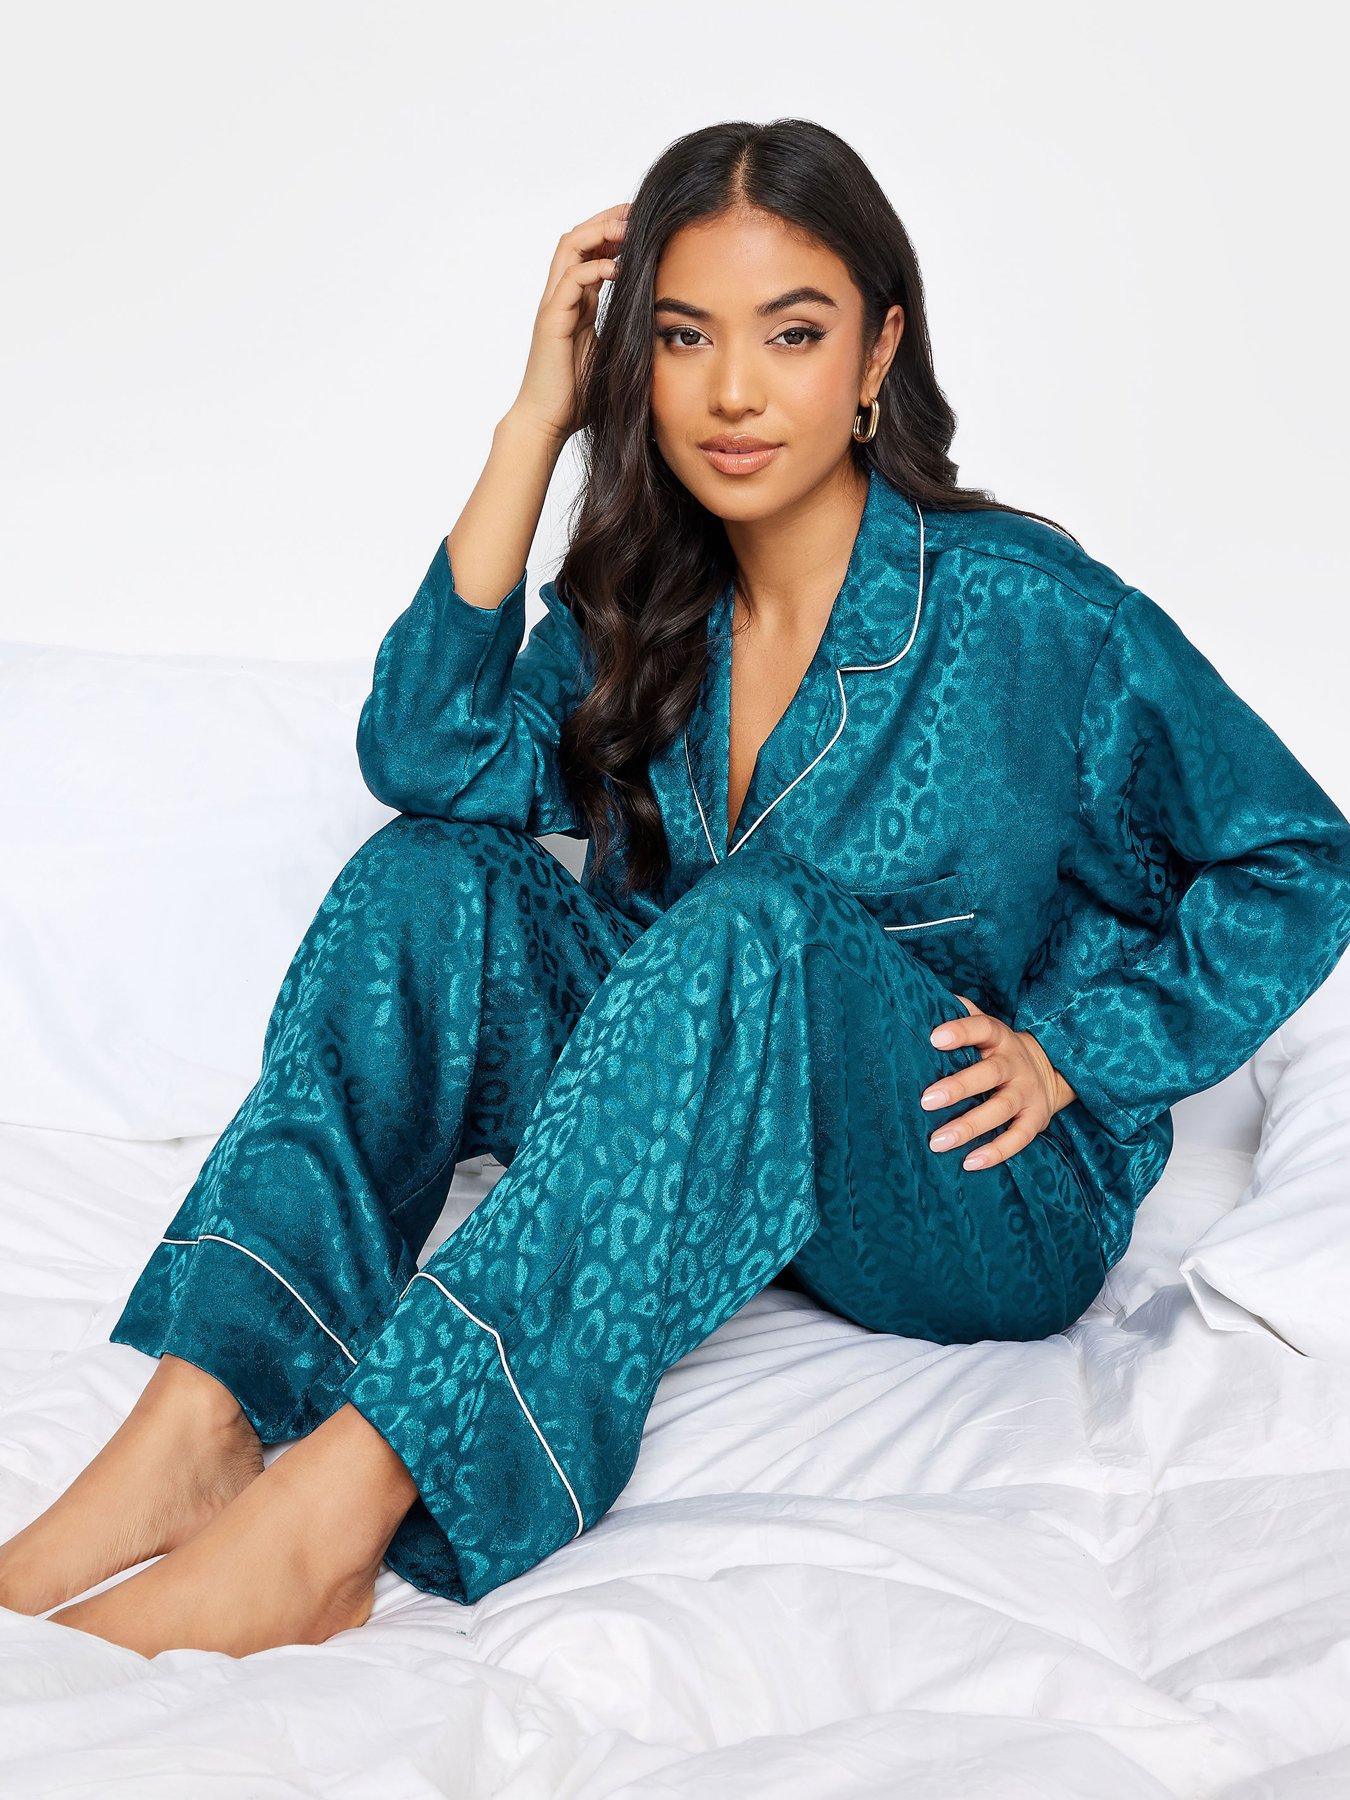 Loungeable Exclusive Satin Jacquard Spot Pajama Set in teal-Green